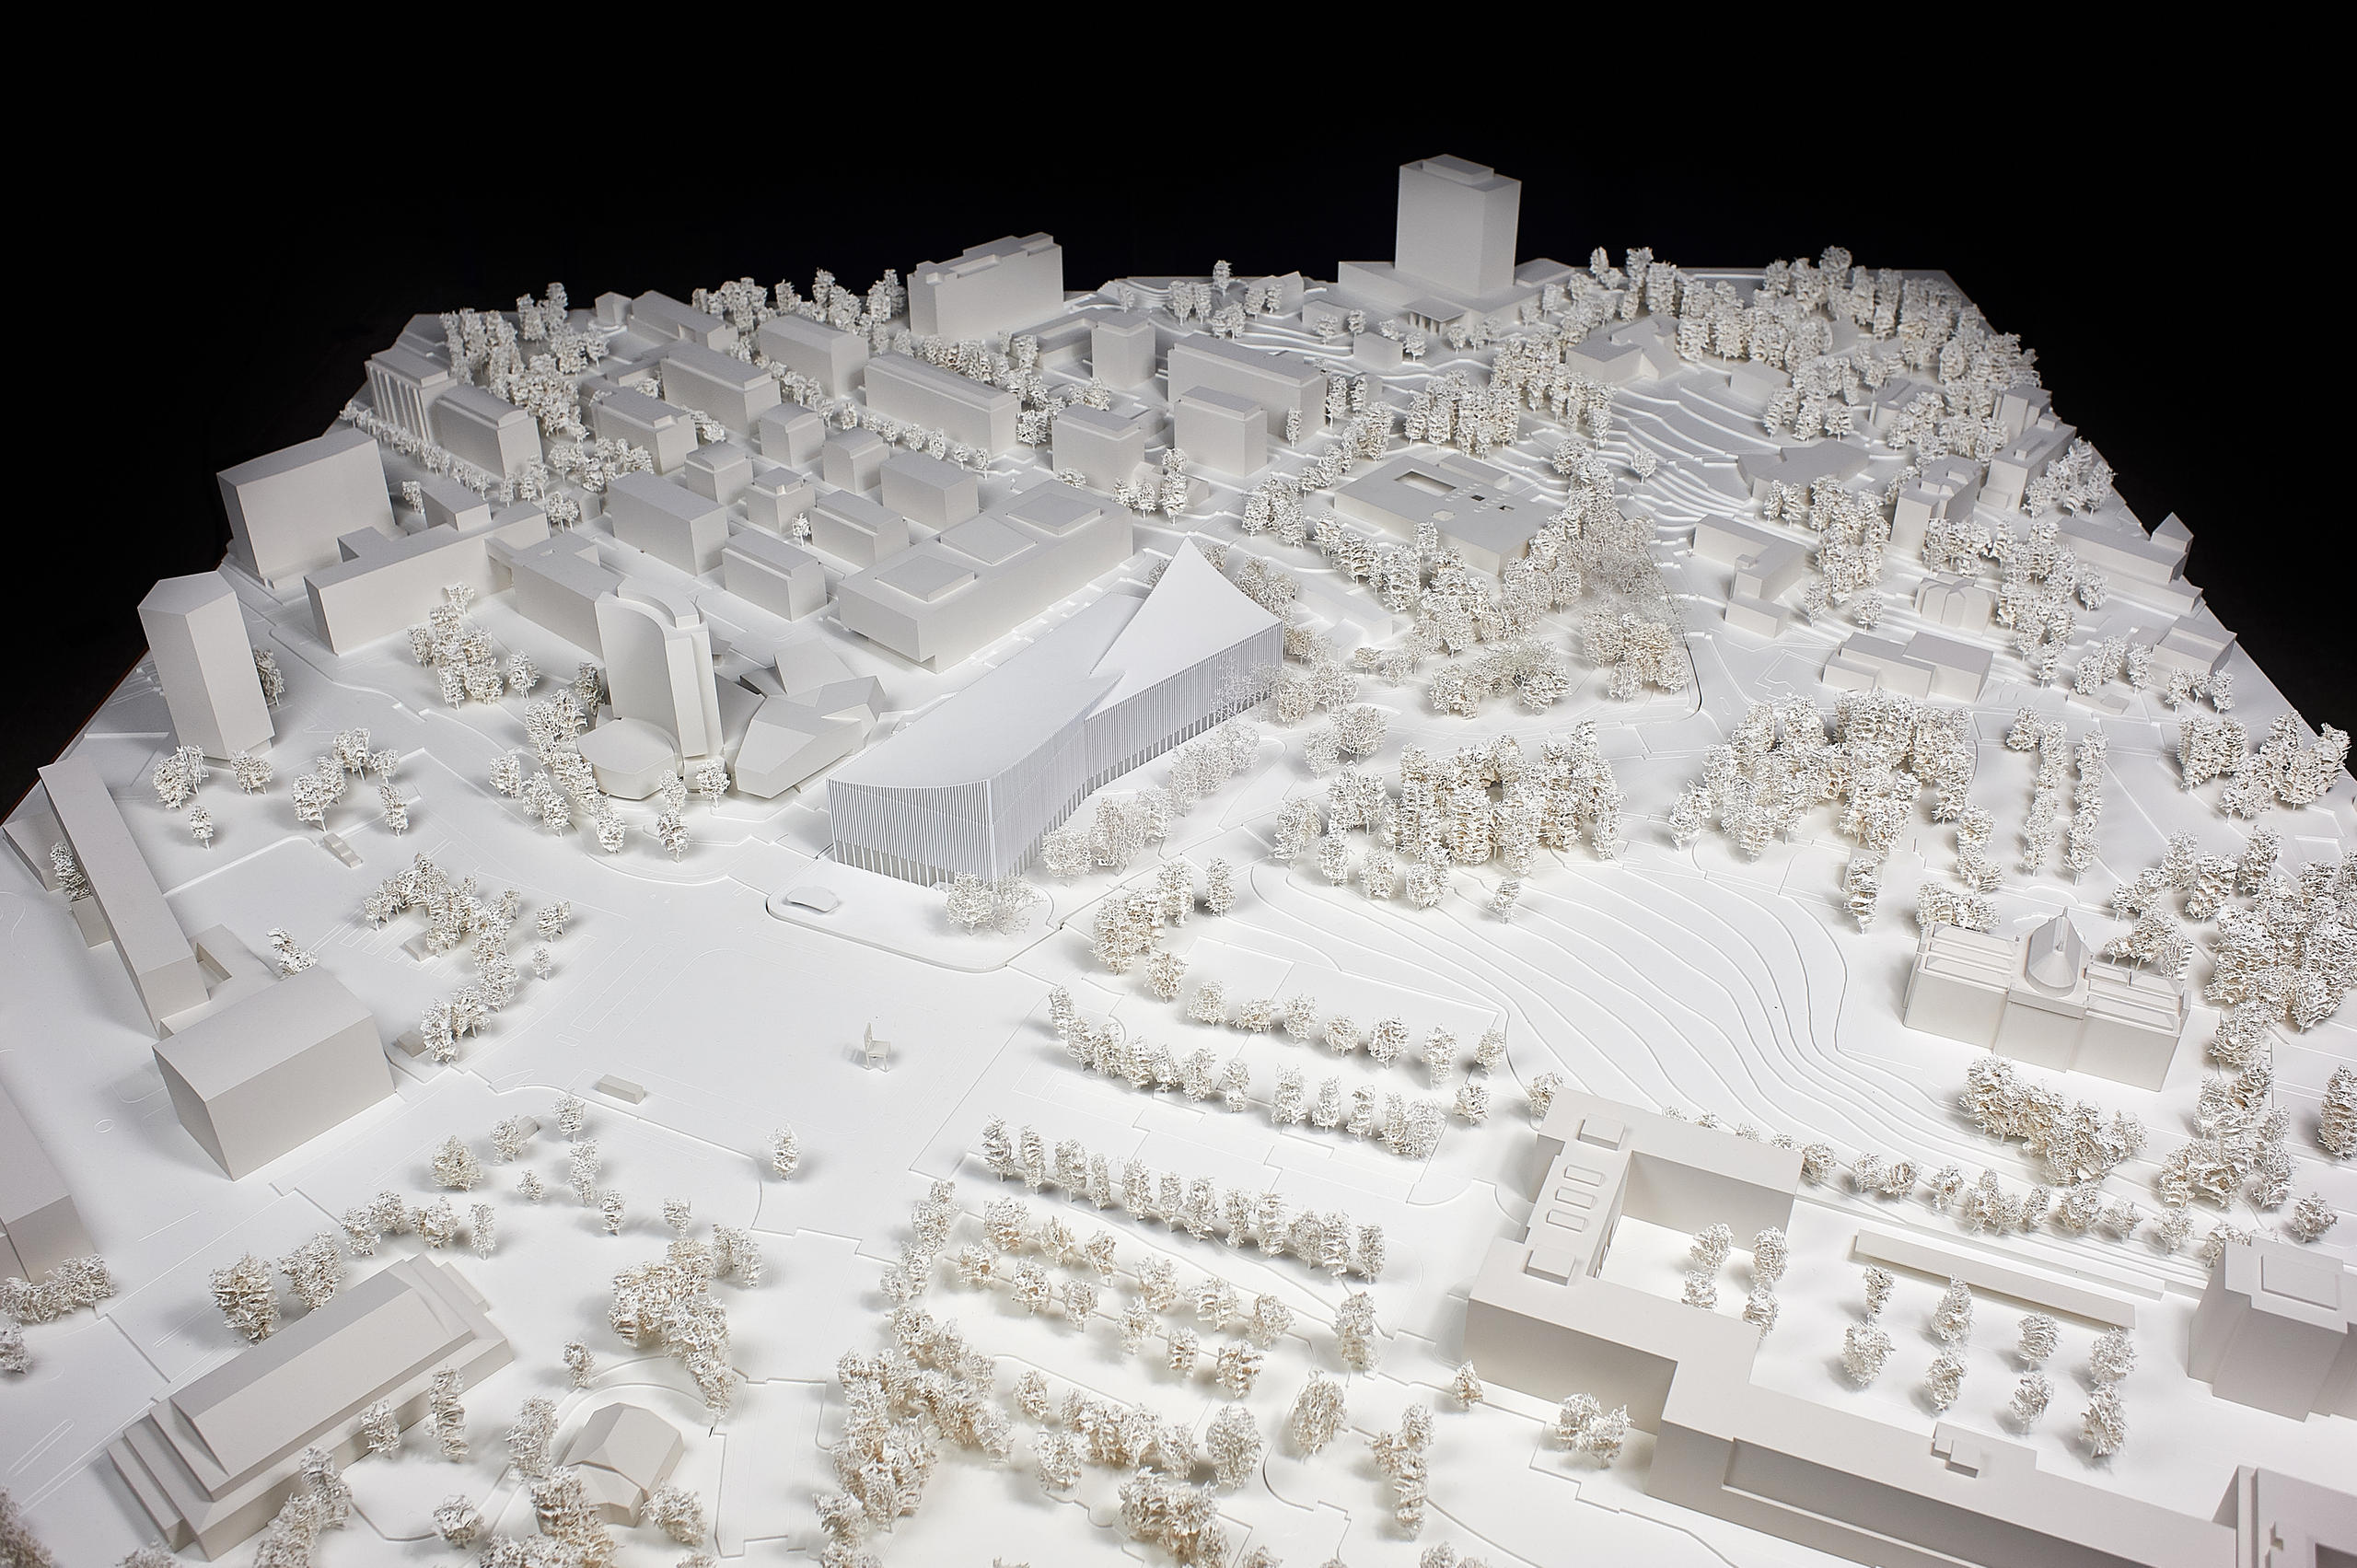 Model showing the City of Music Complex (centre) and UN Palais des Nations (bottom right)